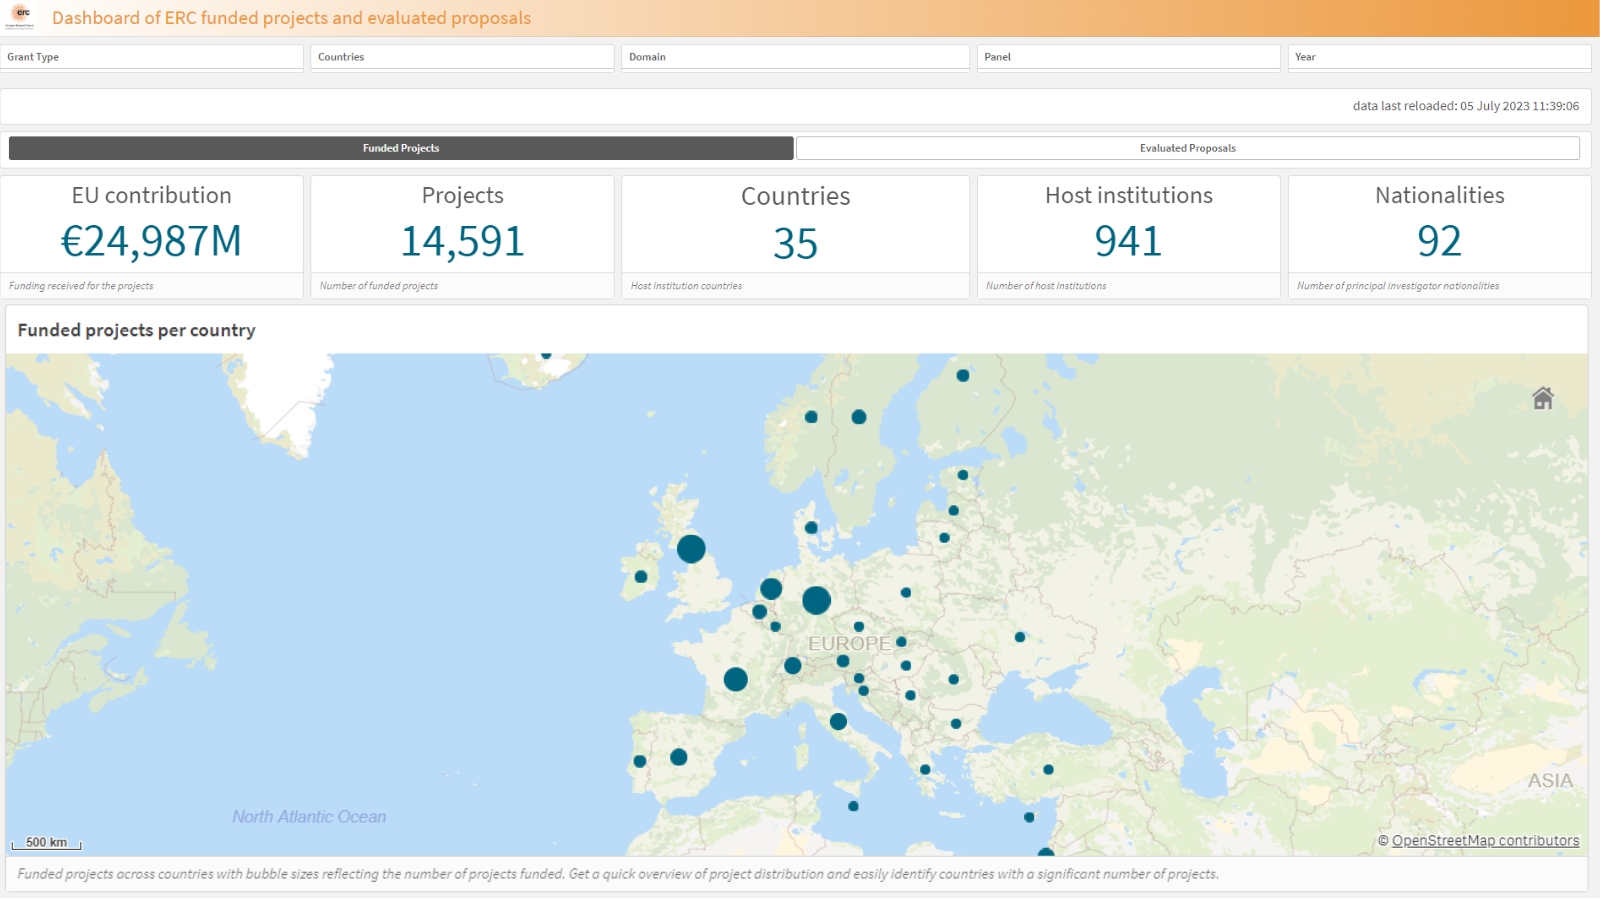 Dashboard on grants and proposals to the European Research Council (ERC)